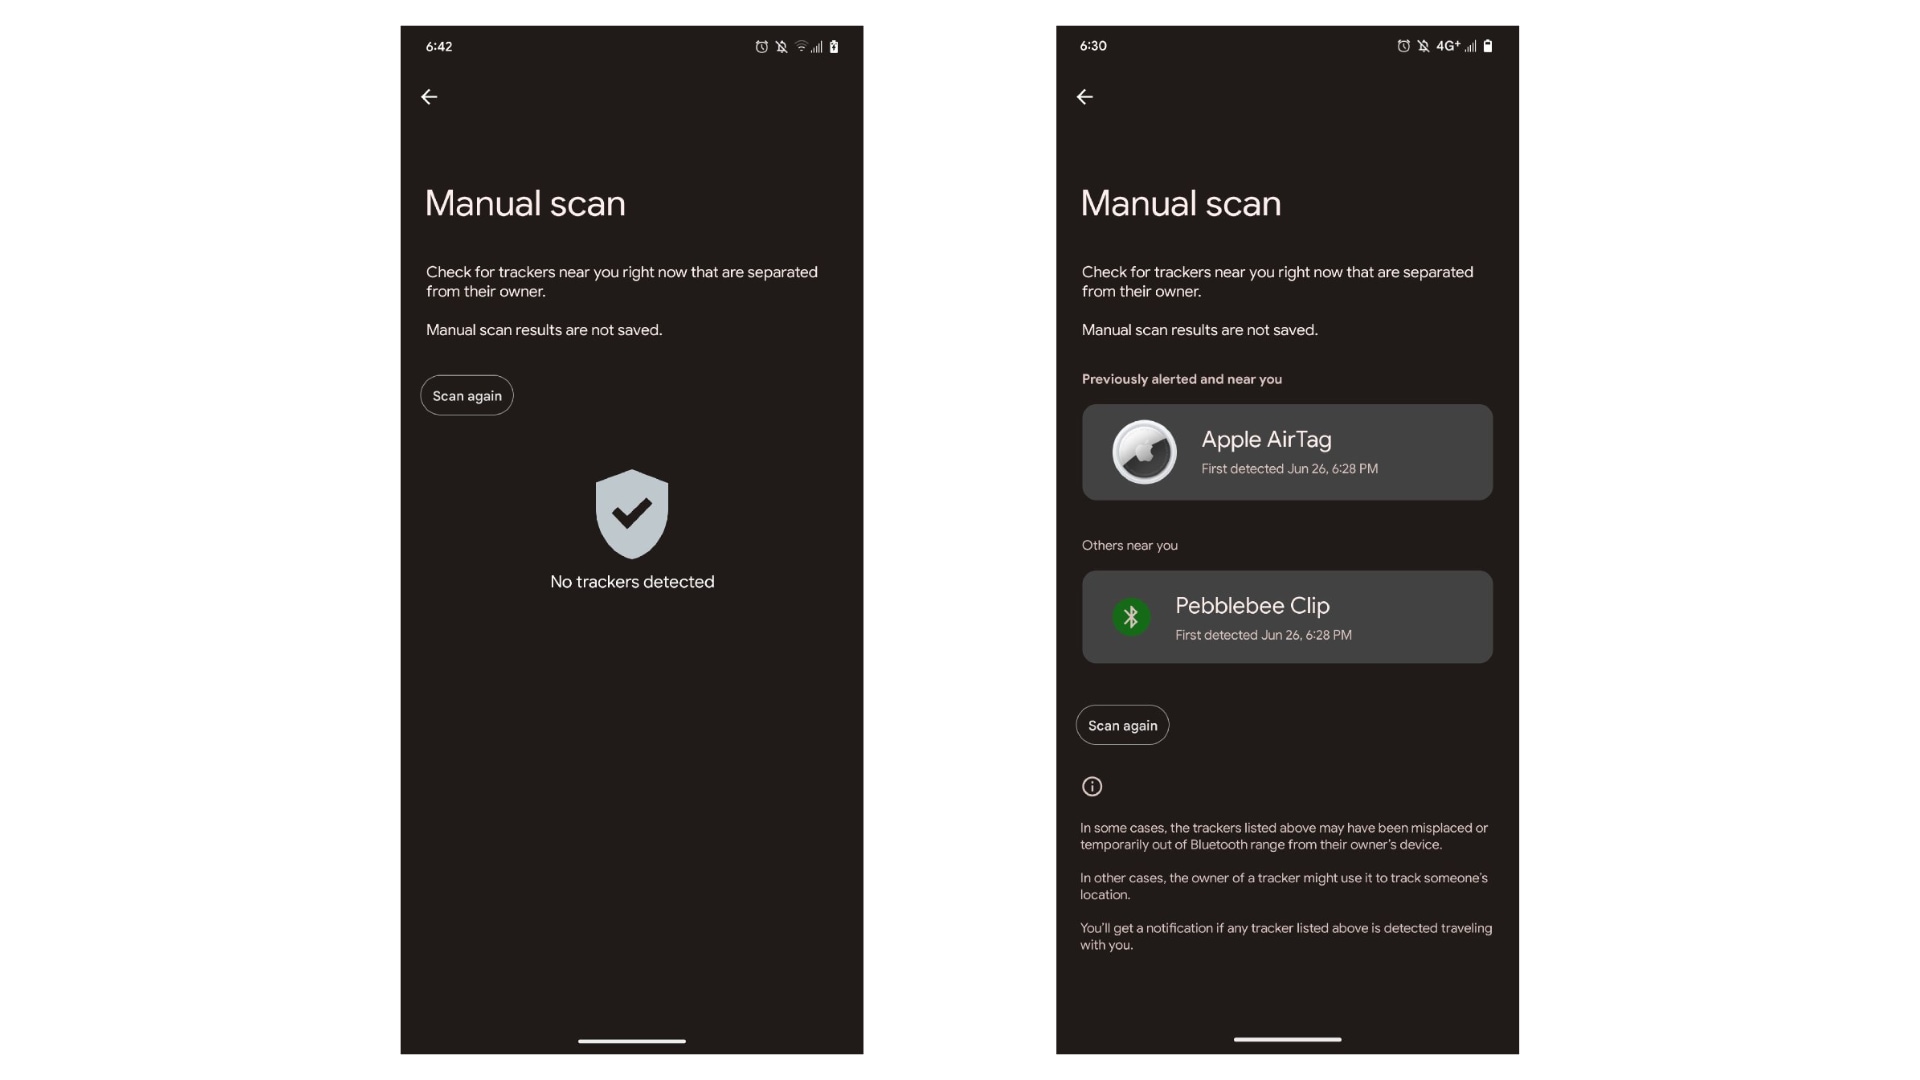 Leaked screenshots show Google’s upcoming AirTag tracking Android app